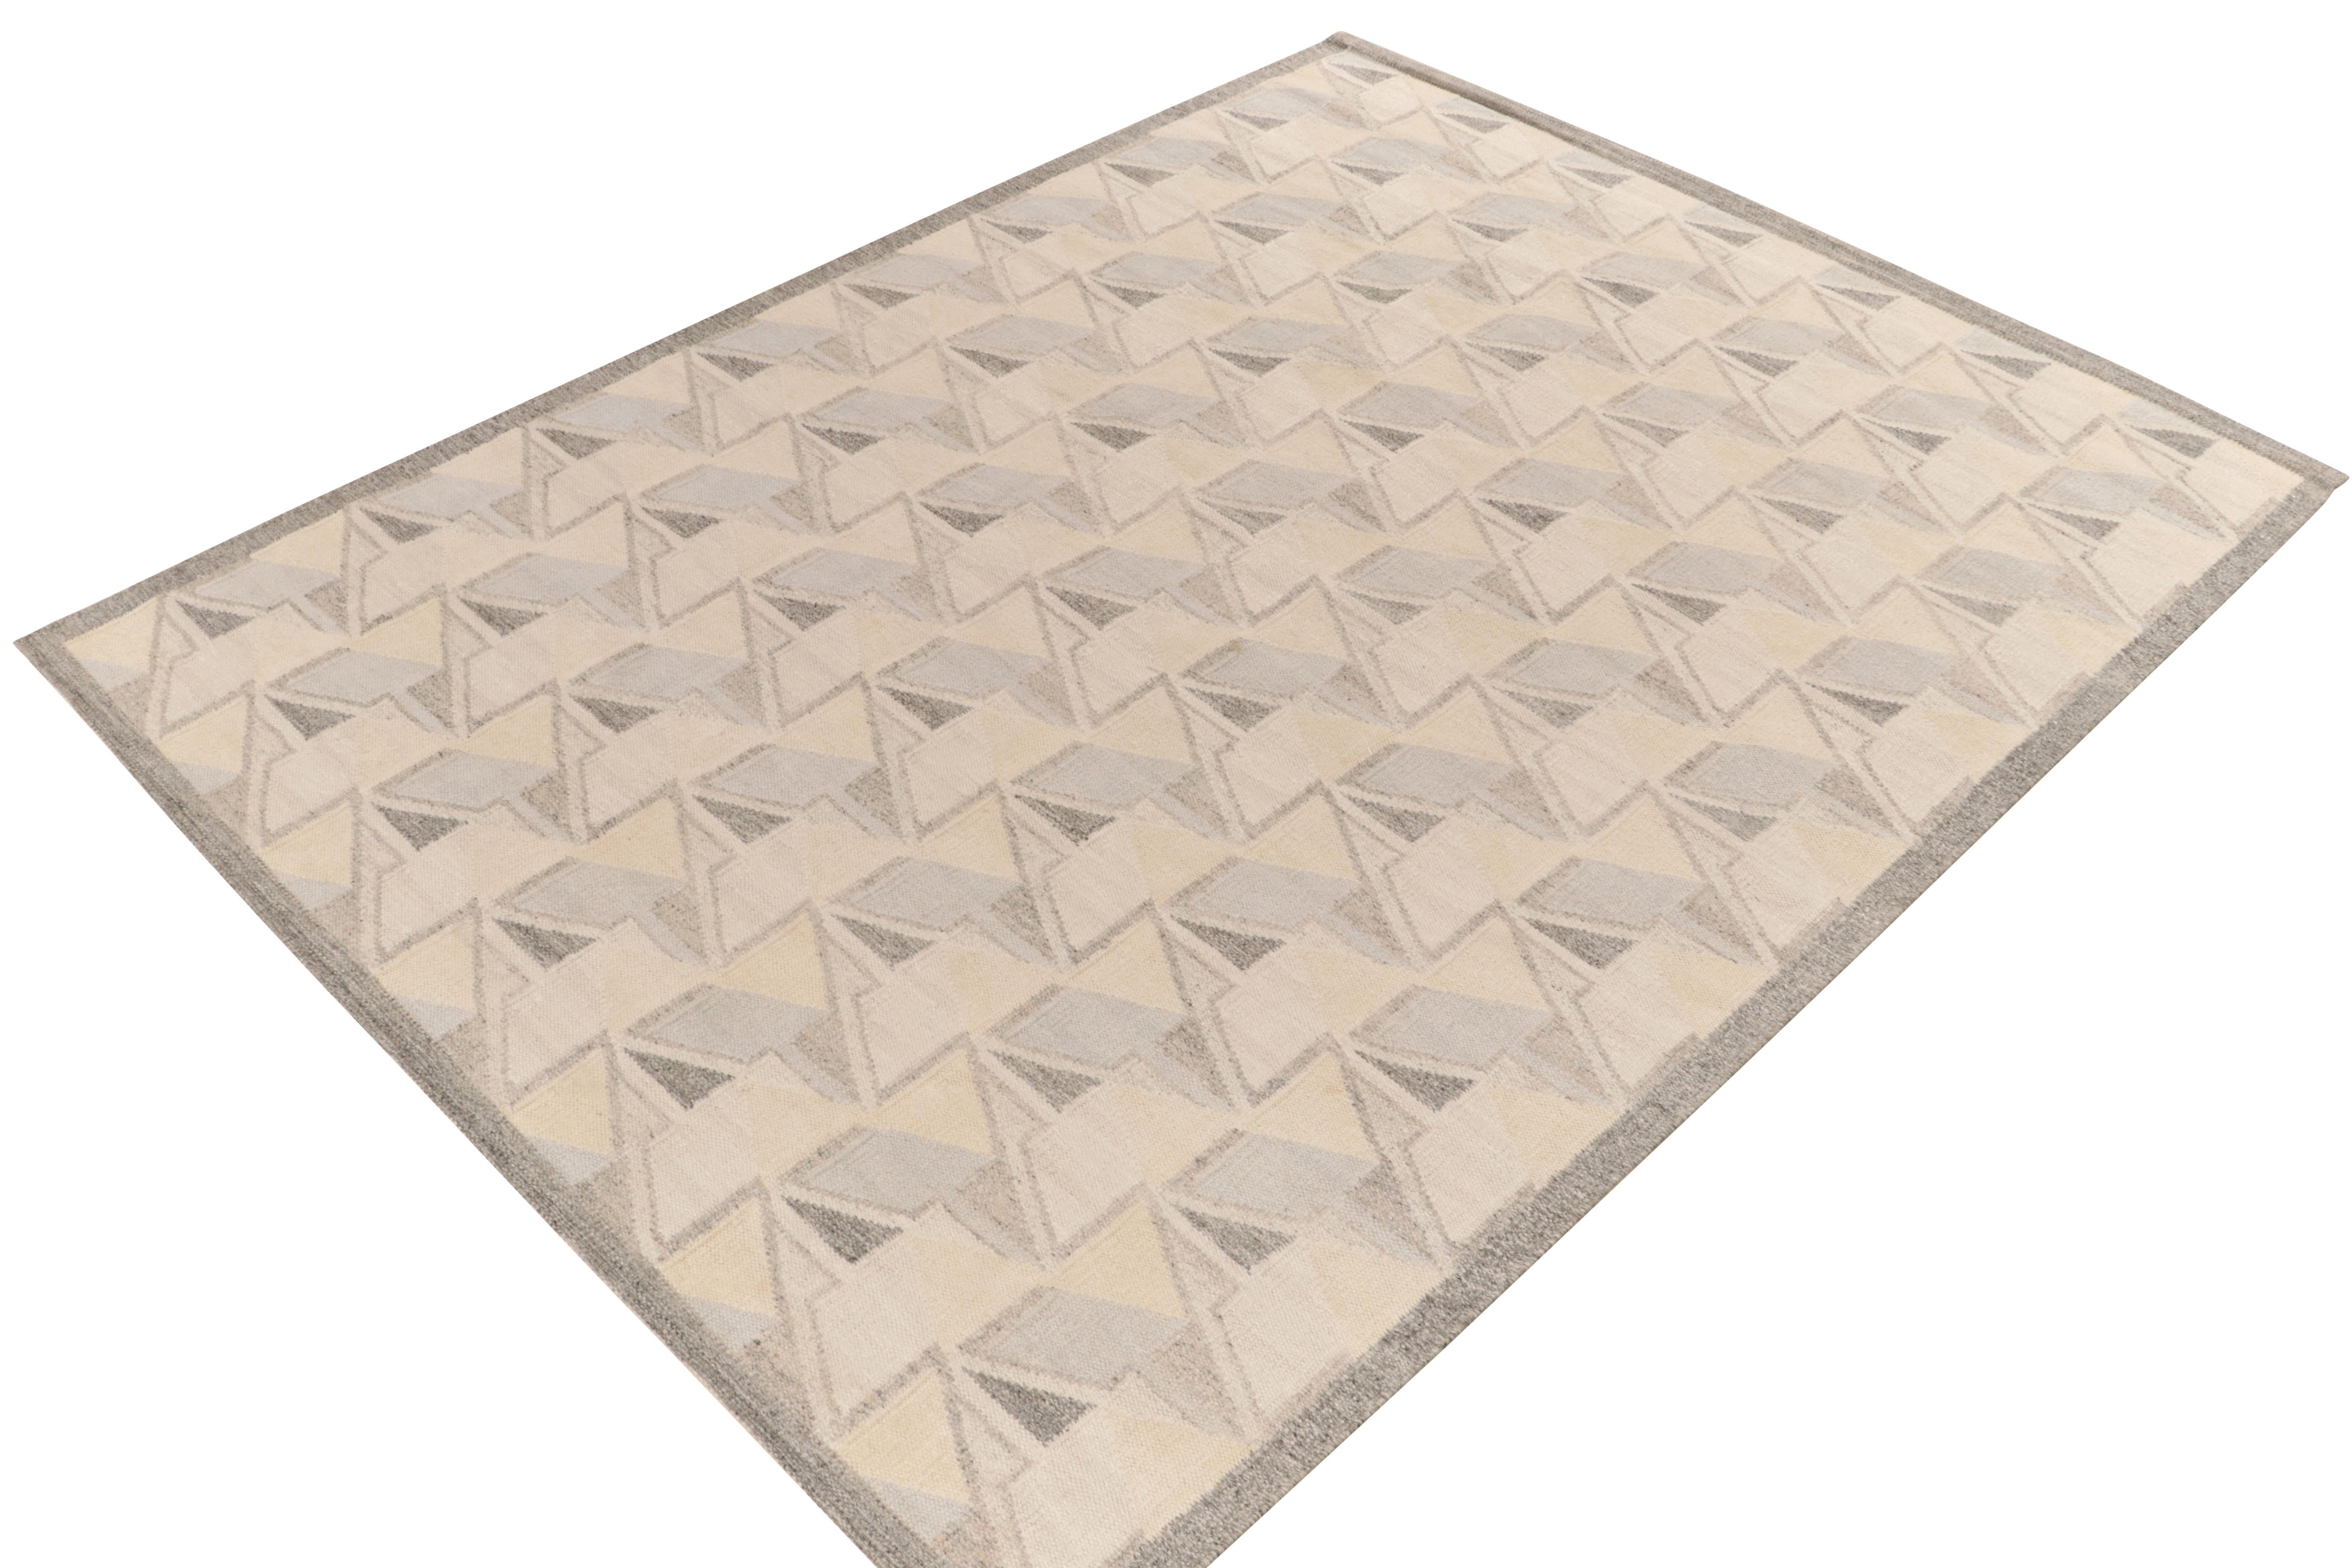 Rug & Kilim’s Scandinavian style kilim from our celebrated flatweave collection. This 10x14 rug enjoys the finesse of Swedish aesthetics with a dextrous geometric pattern casting a 3D impression. The colorway in undyed natural yarns enjoys forgiving